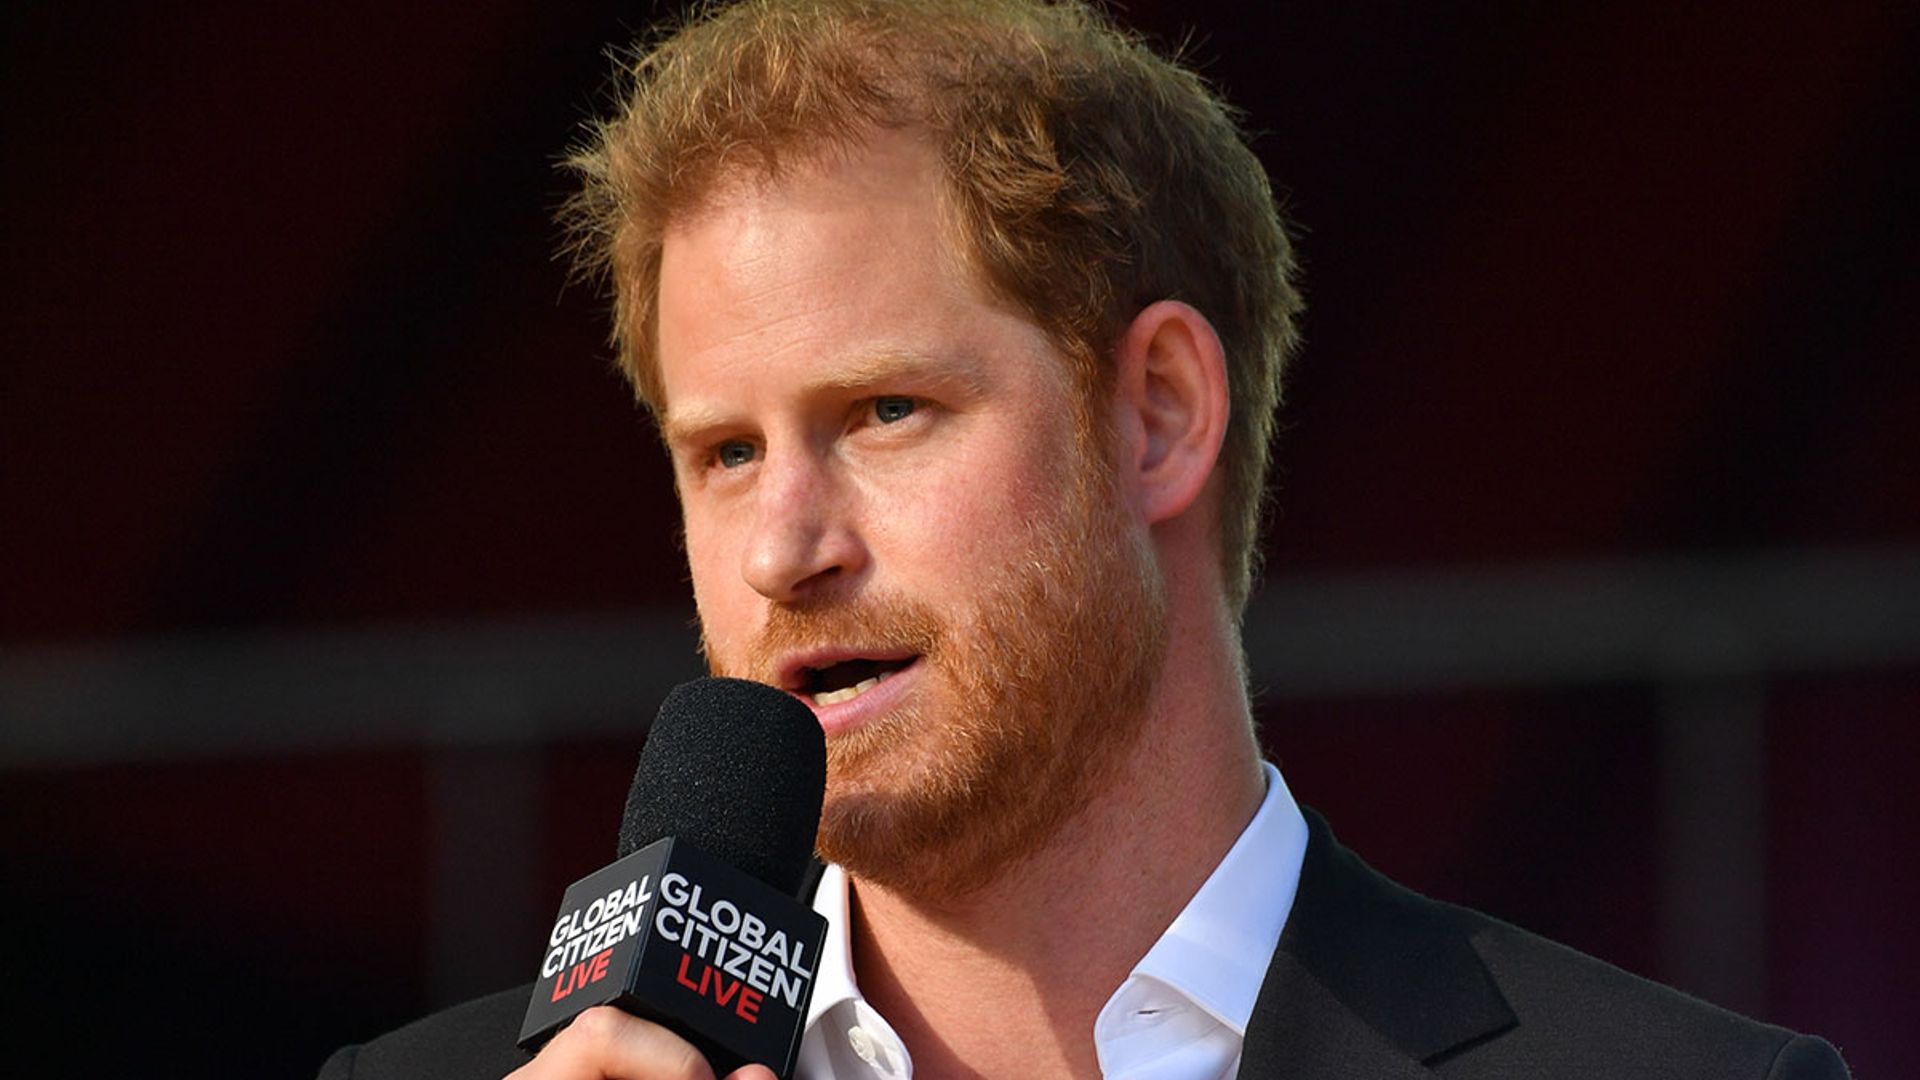 Prince Harry to return to New York to present special awards